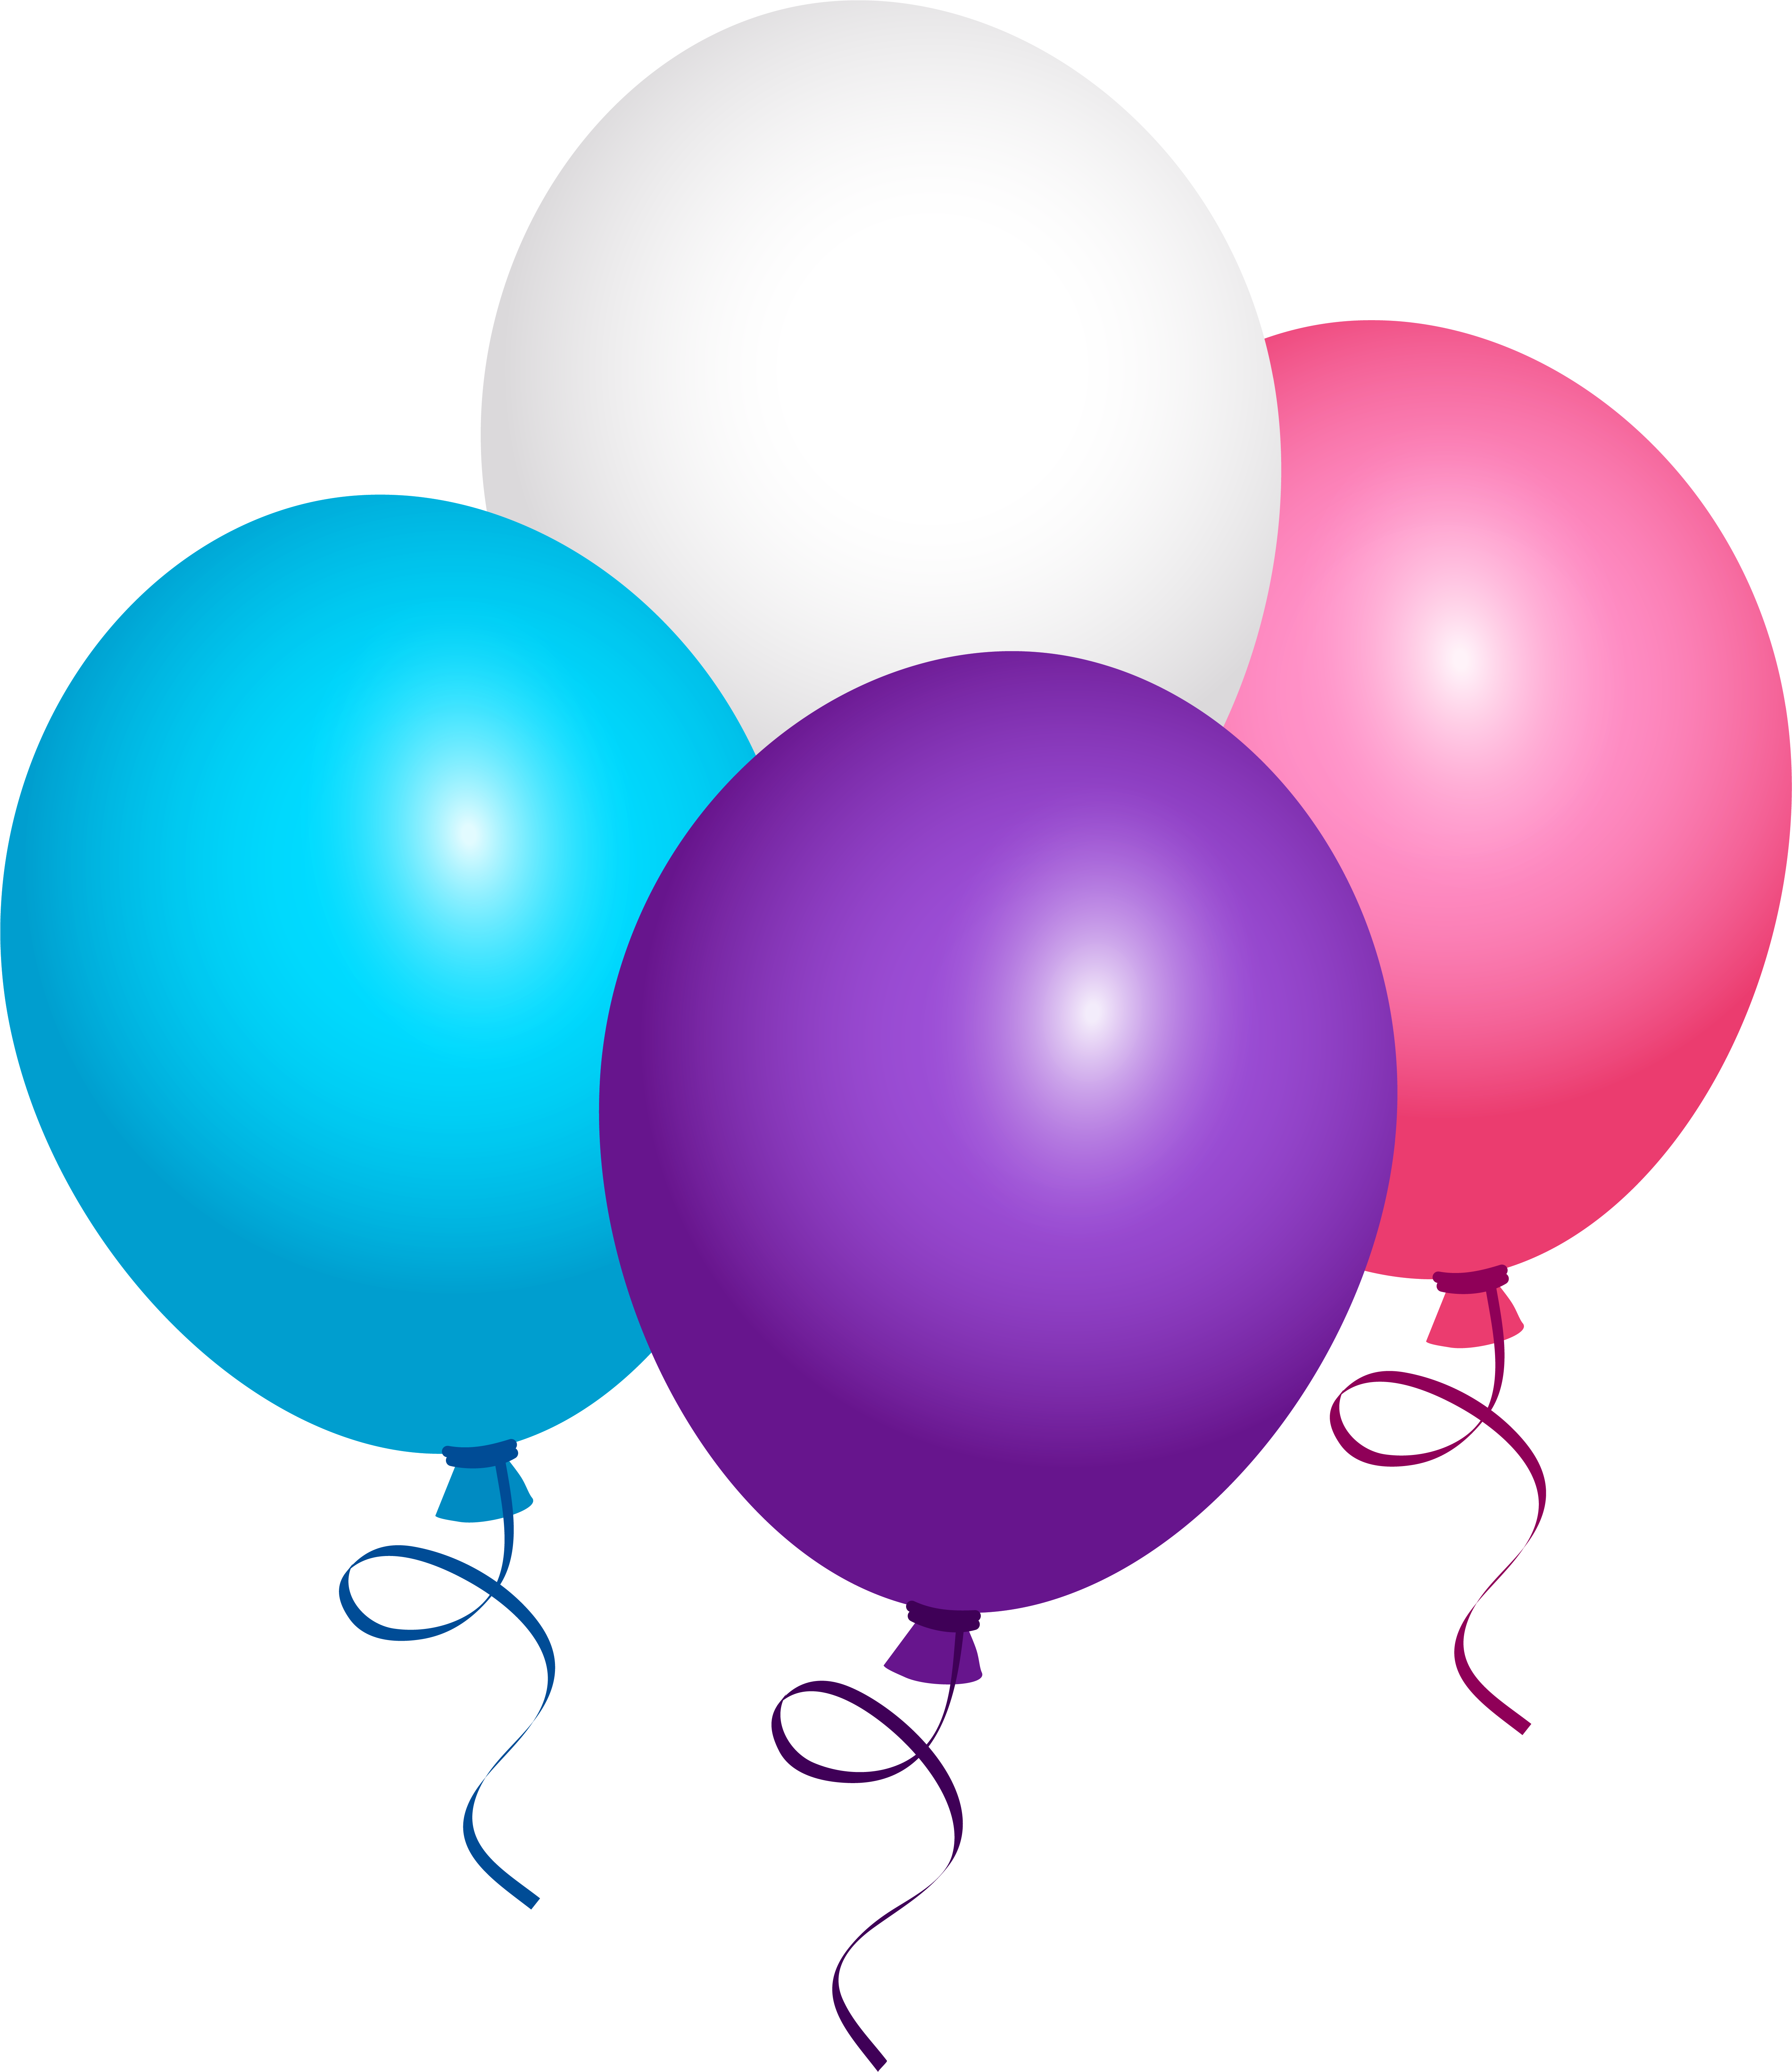 Pin By Celtic Celtic On Luftballons - Globos .png (5557x6160)